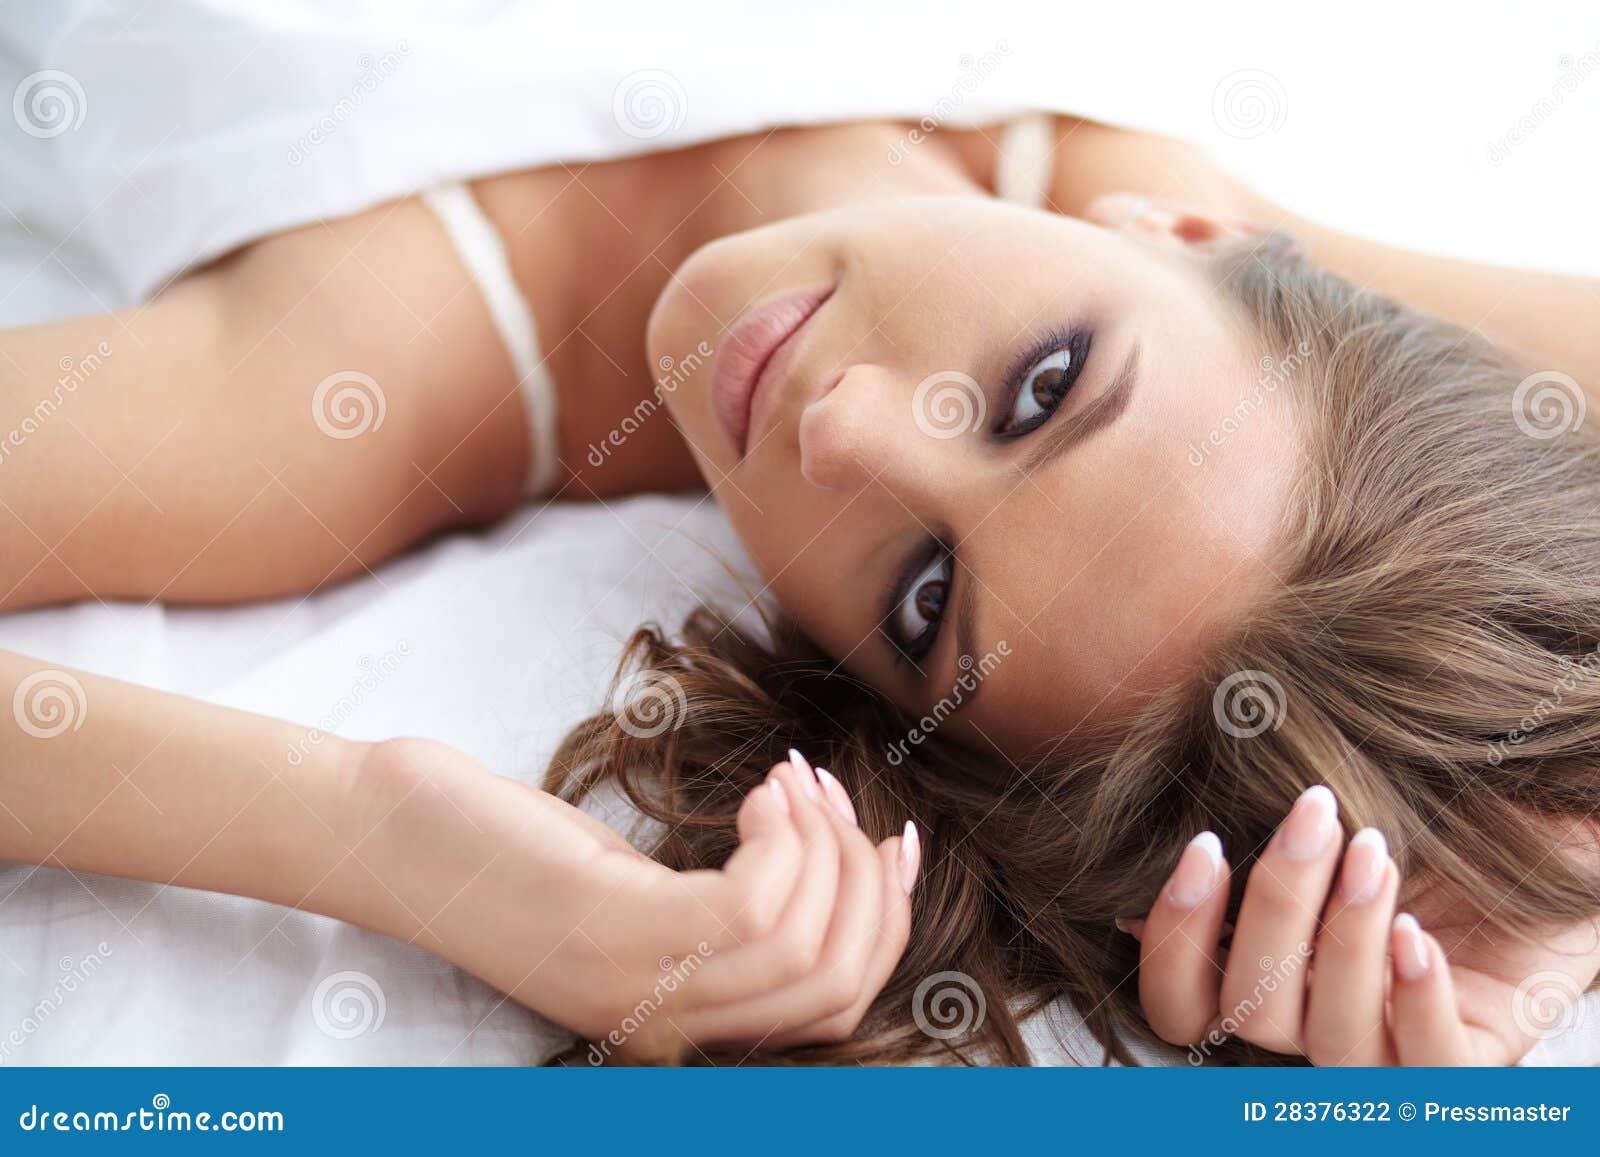 Sexy Woman With Hot Body Posing In Bed Stock Photo, Picture and Royalty  Free Image. Image 11130975.